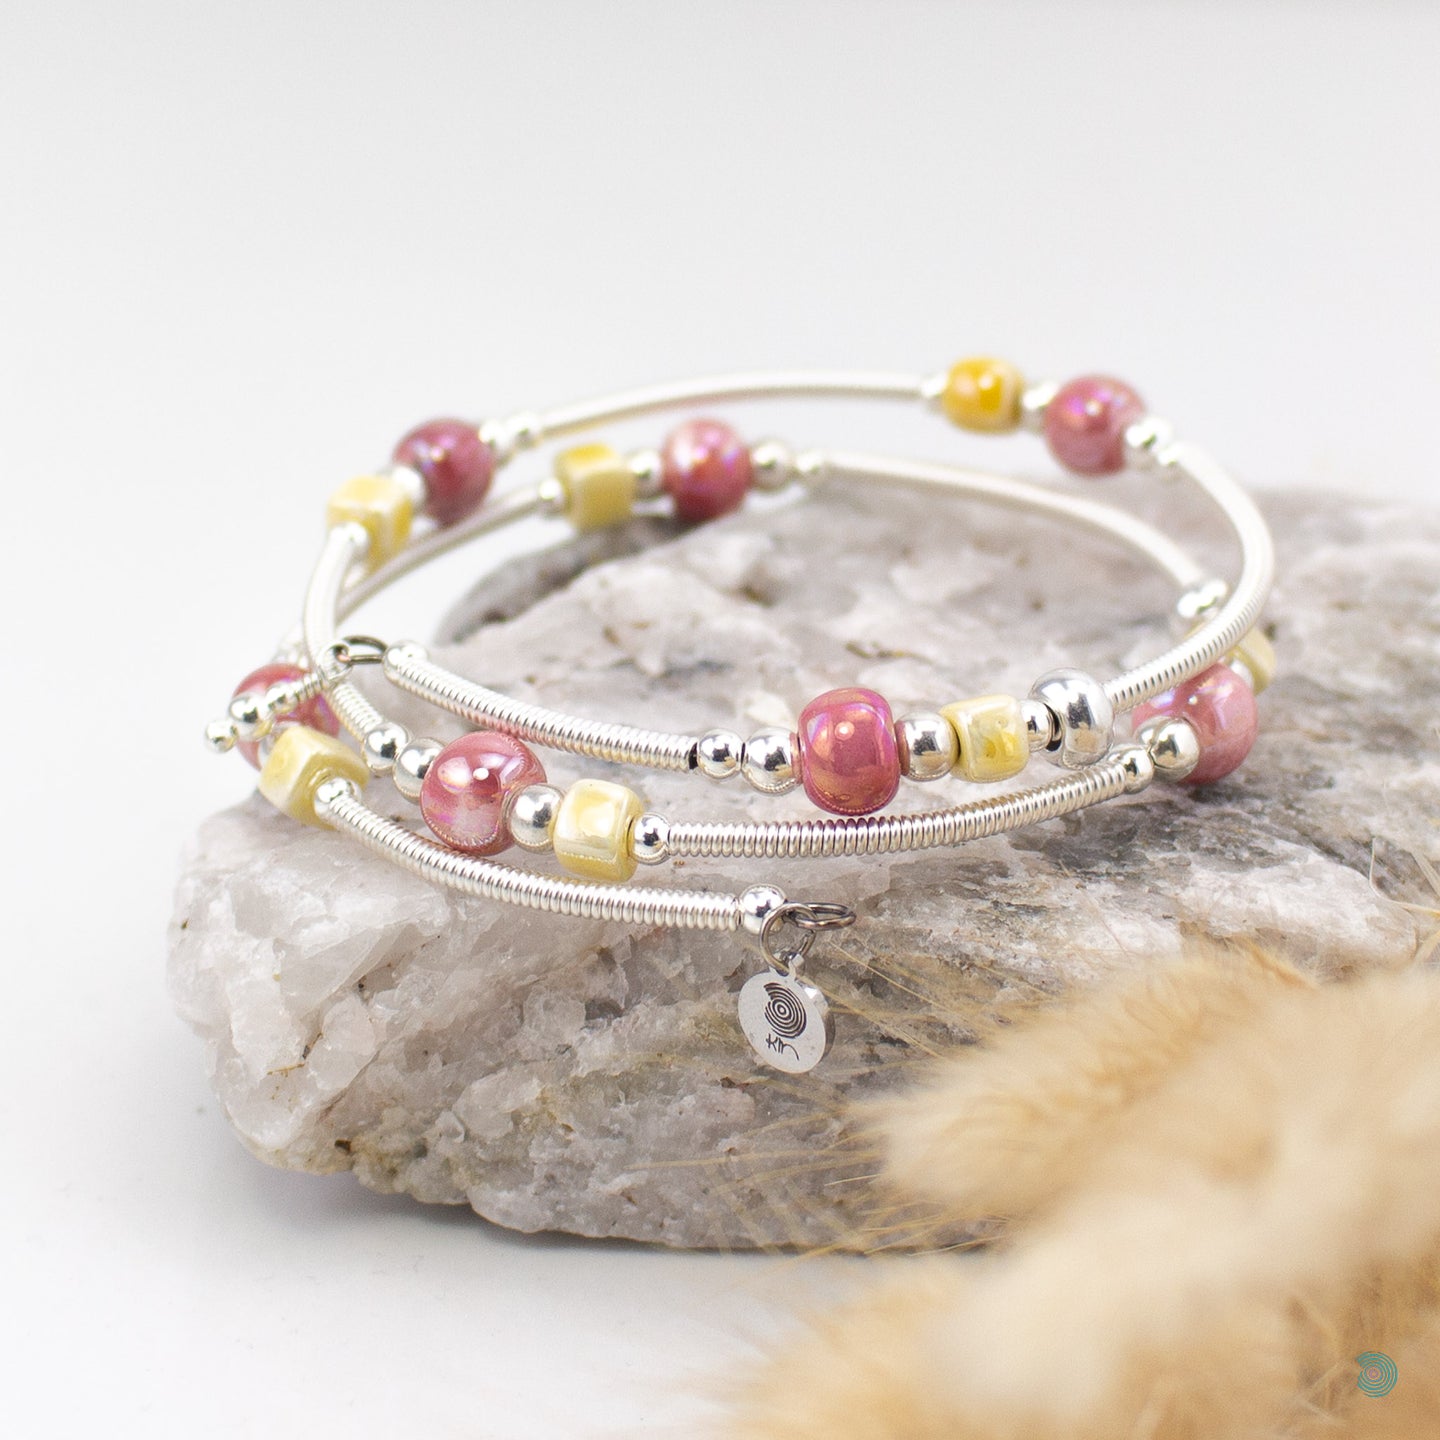 Easy to wear bracelet that simply wraps around the wrist and sits in place. No clasp needed. Hand wrapped silver filled tubes, with ceramic cubes in a yellow and dark pink  colour mix with small sterling silver beads on each side and 